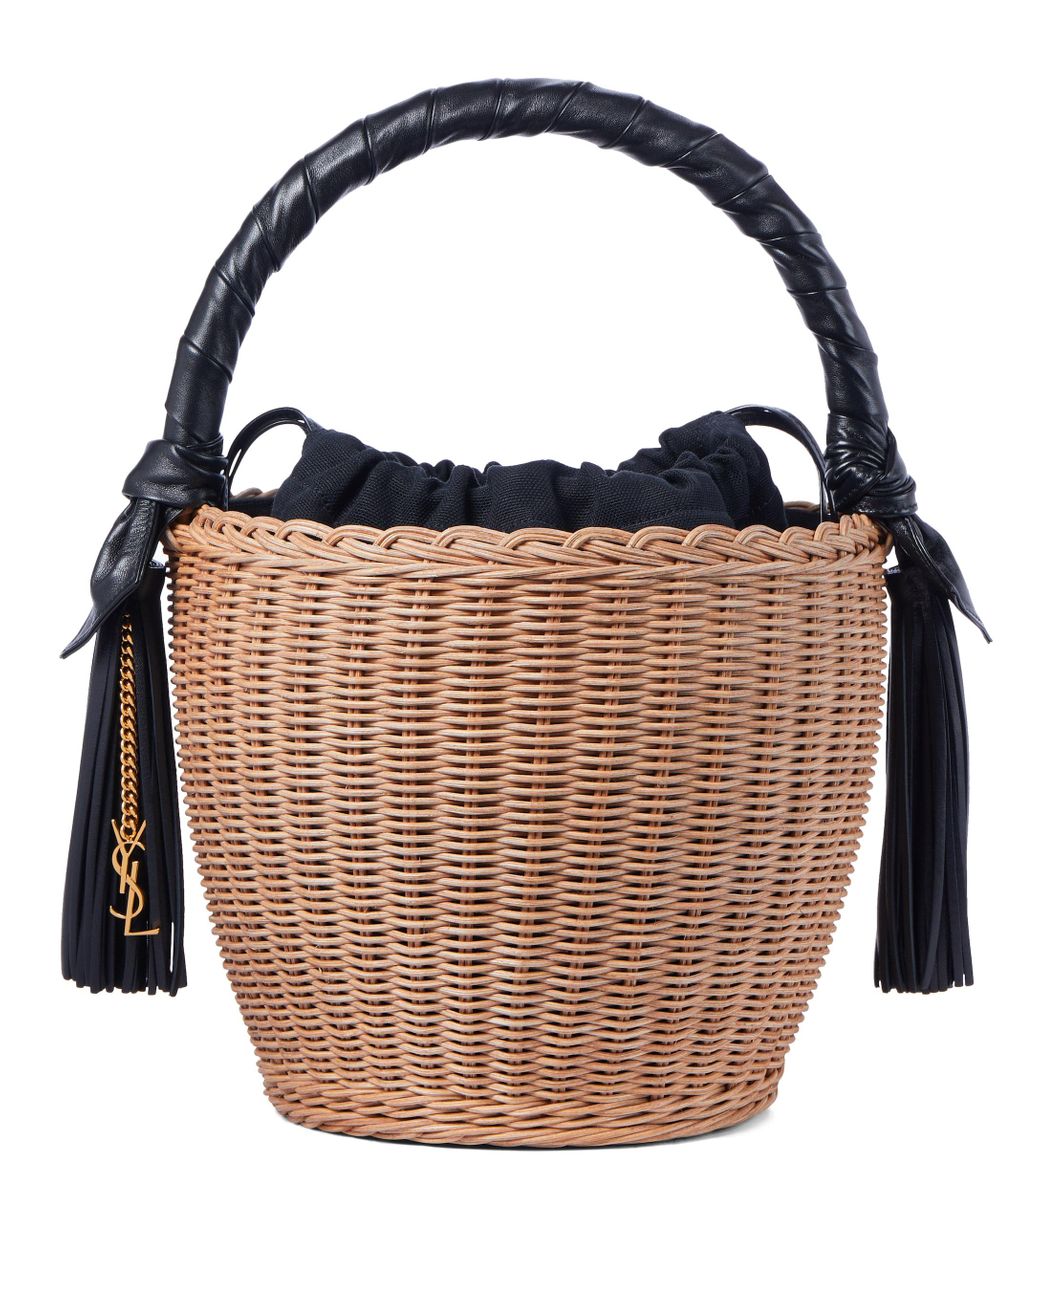 Saint Laurent Leather-trimmed Wicker Tote in Beige (Natural) - Lyst